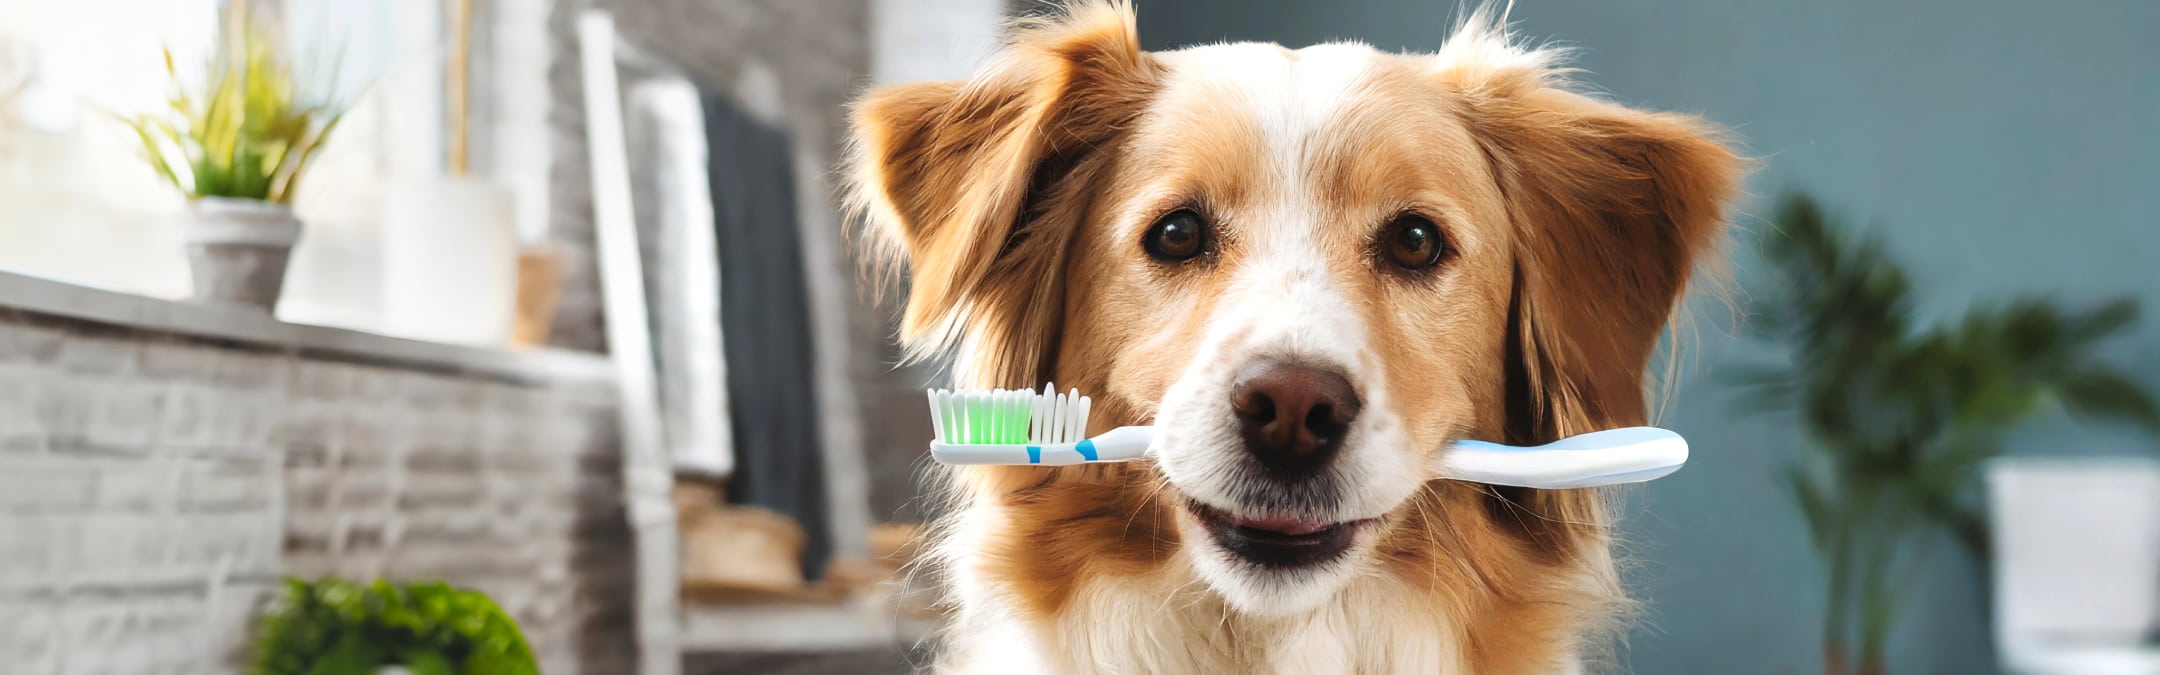 How To Brush Your Dog's Teeth At Home